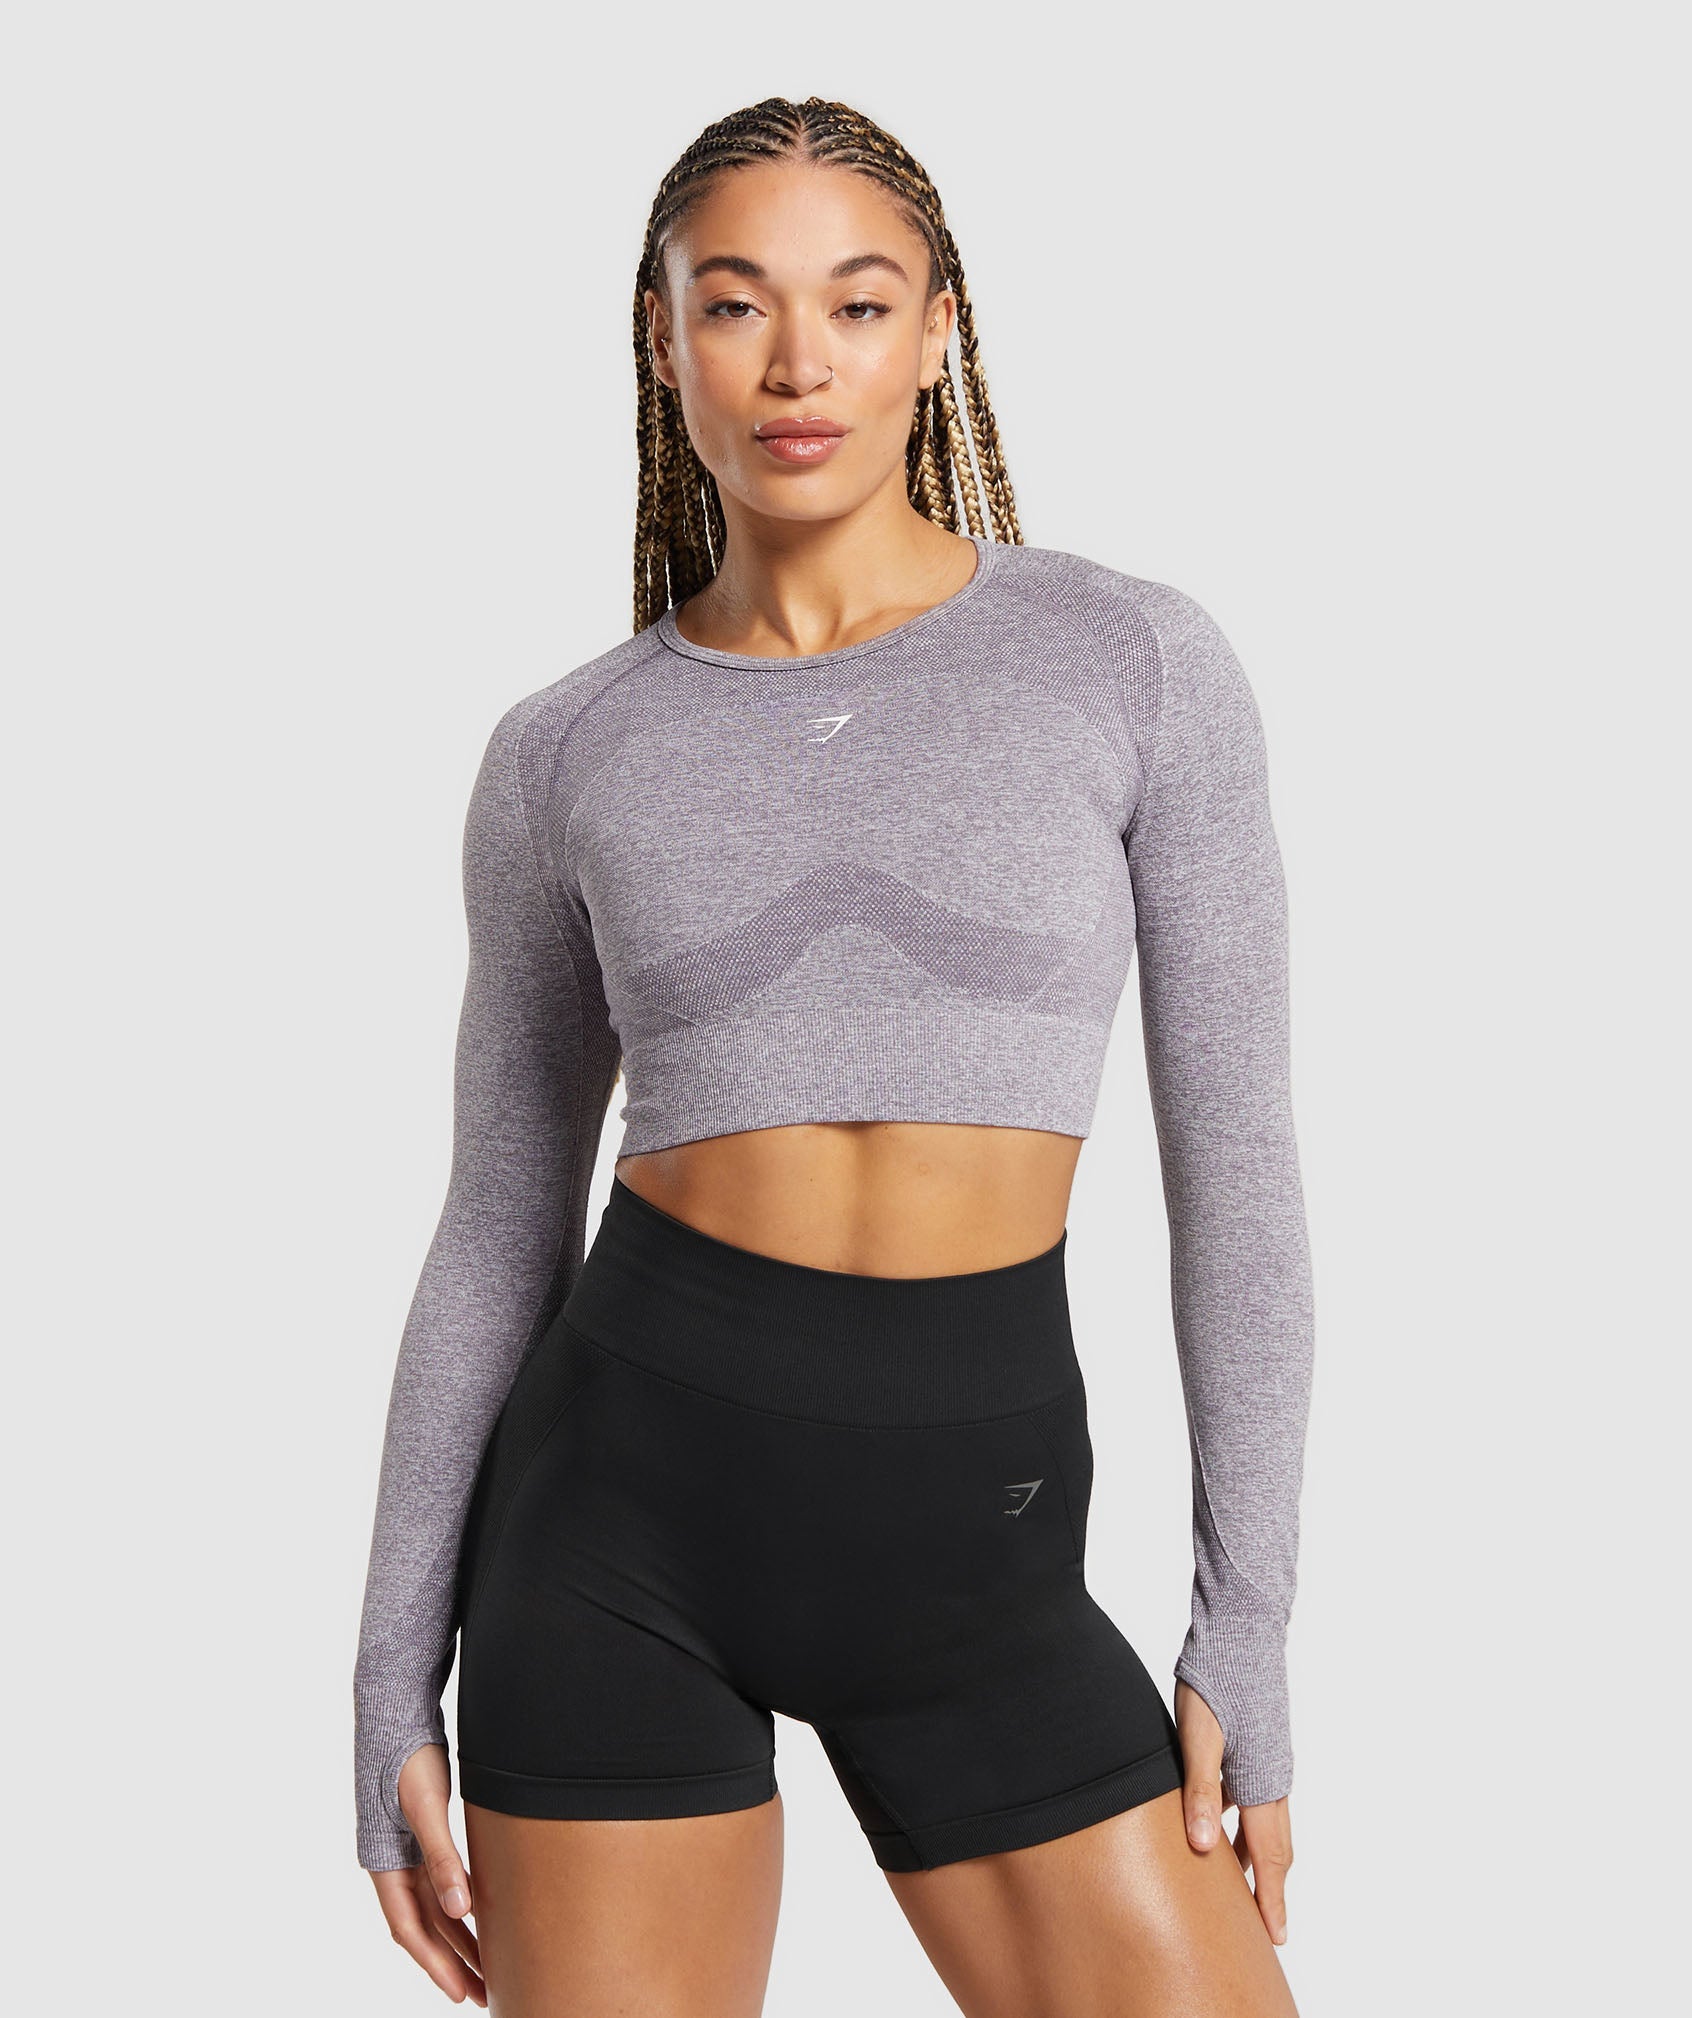 Flex Long Sleeve Crop Top in {{variantColor} is out of stock